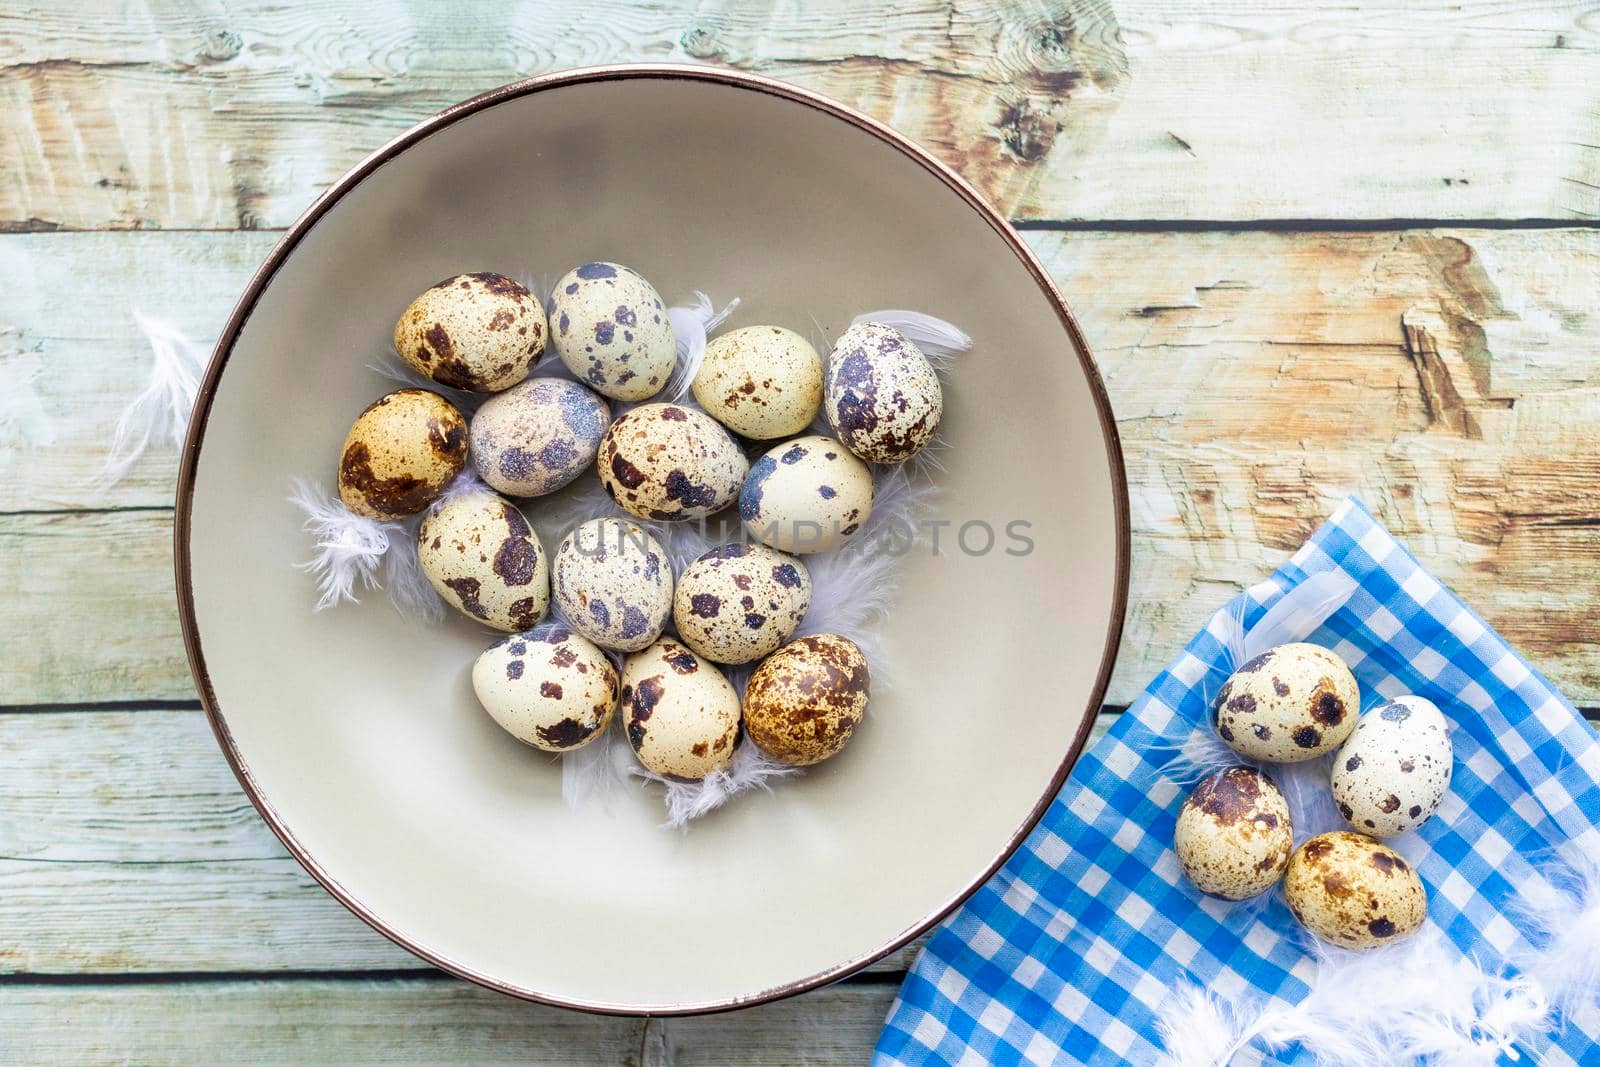 Quail eggs inside a decorative plate and on a background by eagg13